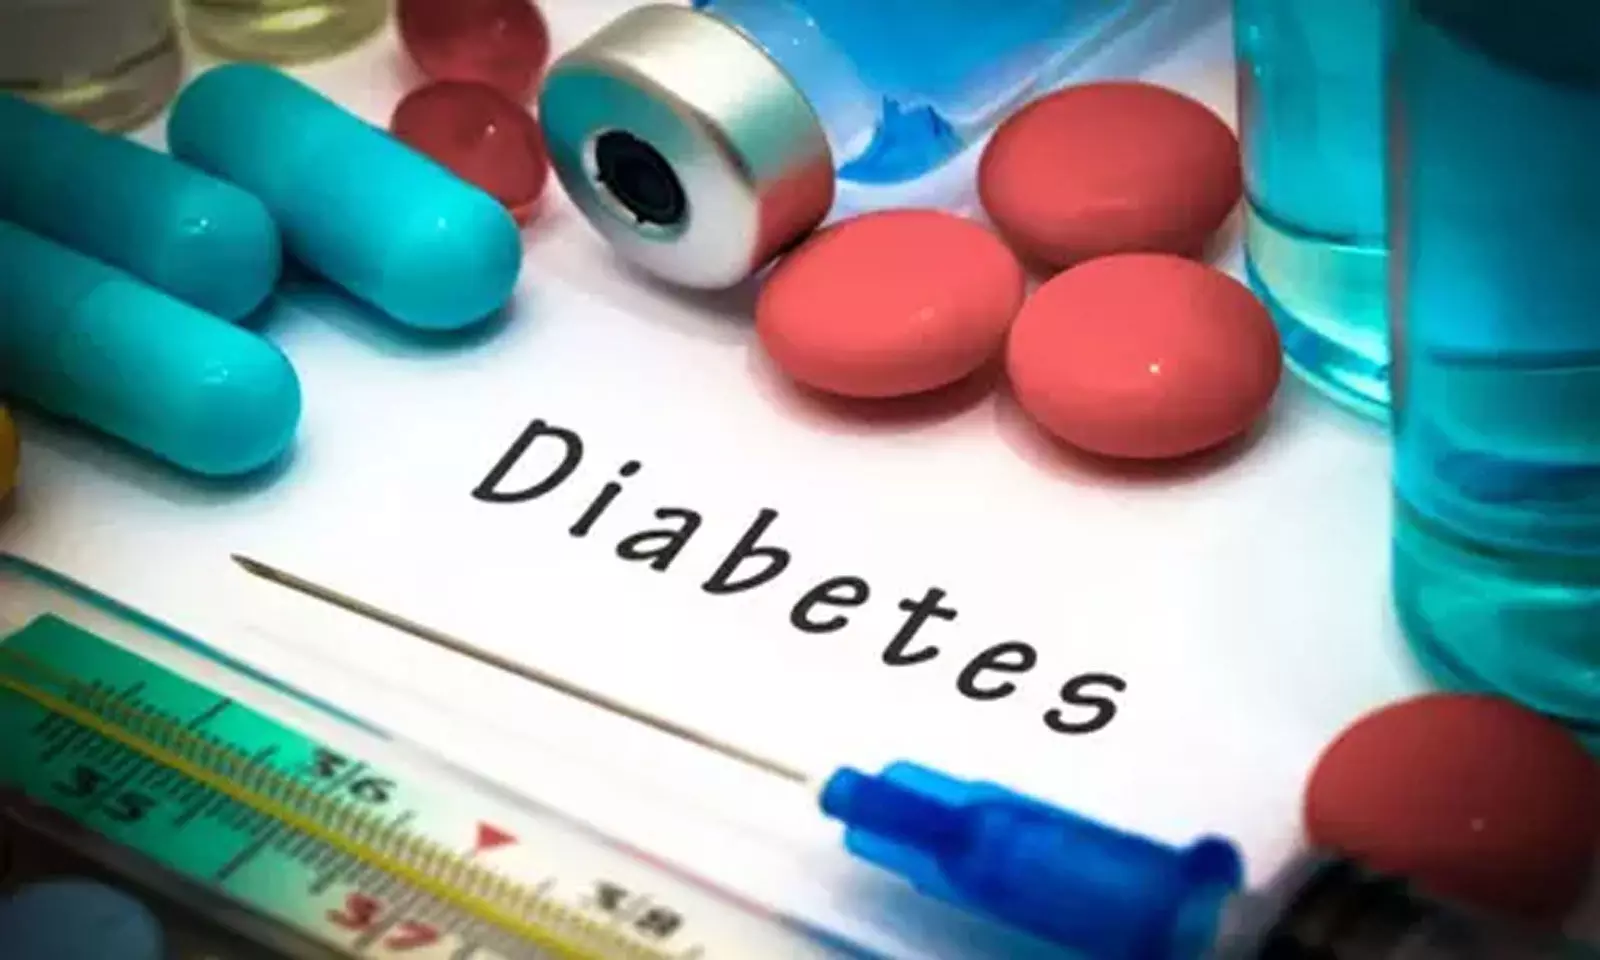 ADAs updated 2020 guidance on pharmacologic treatment of adults with type 2 diabetes